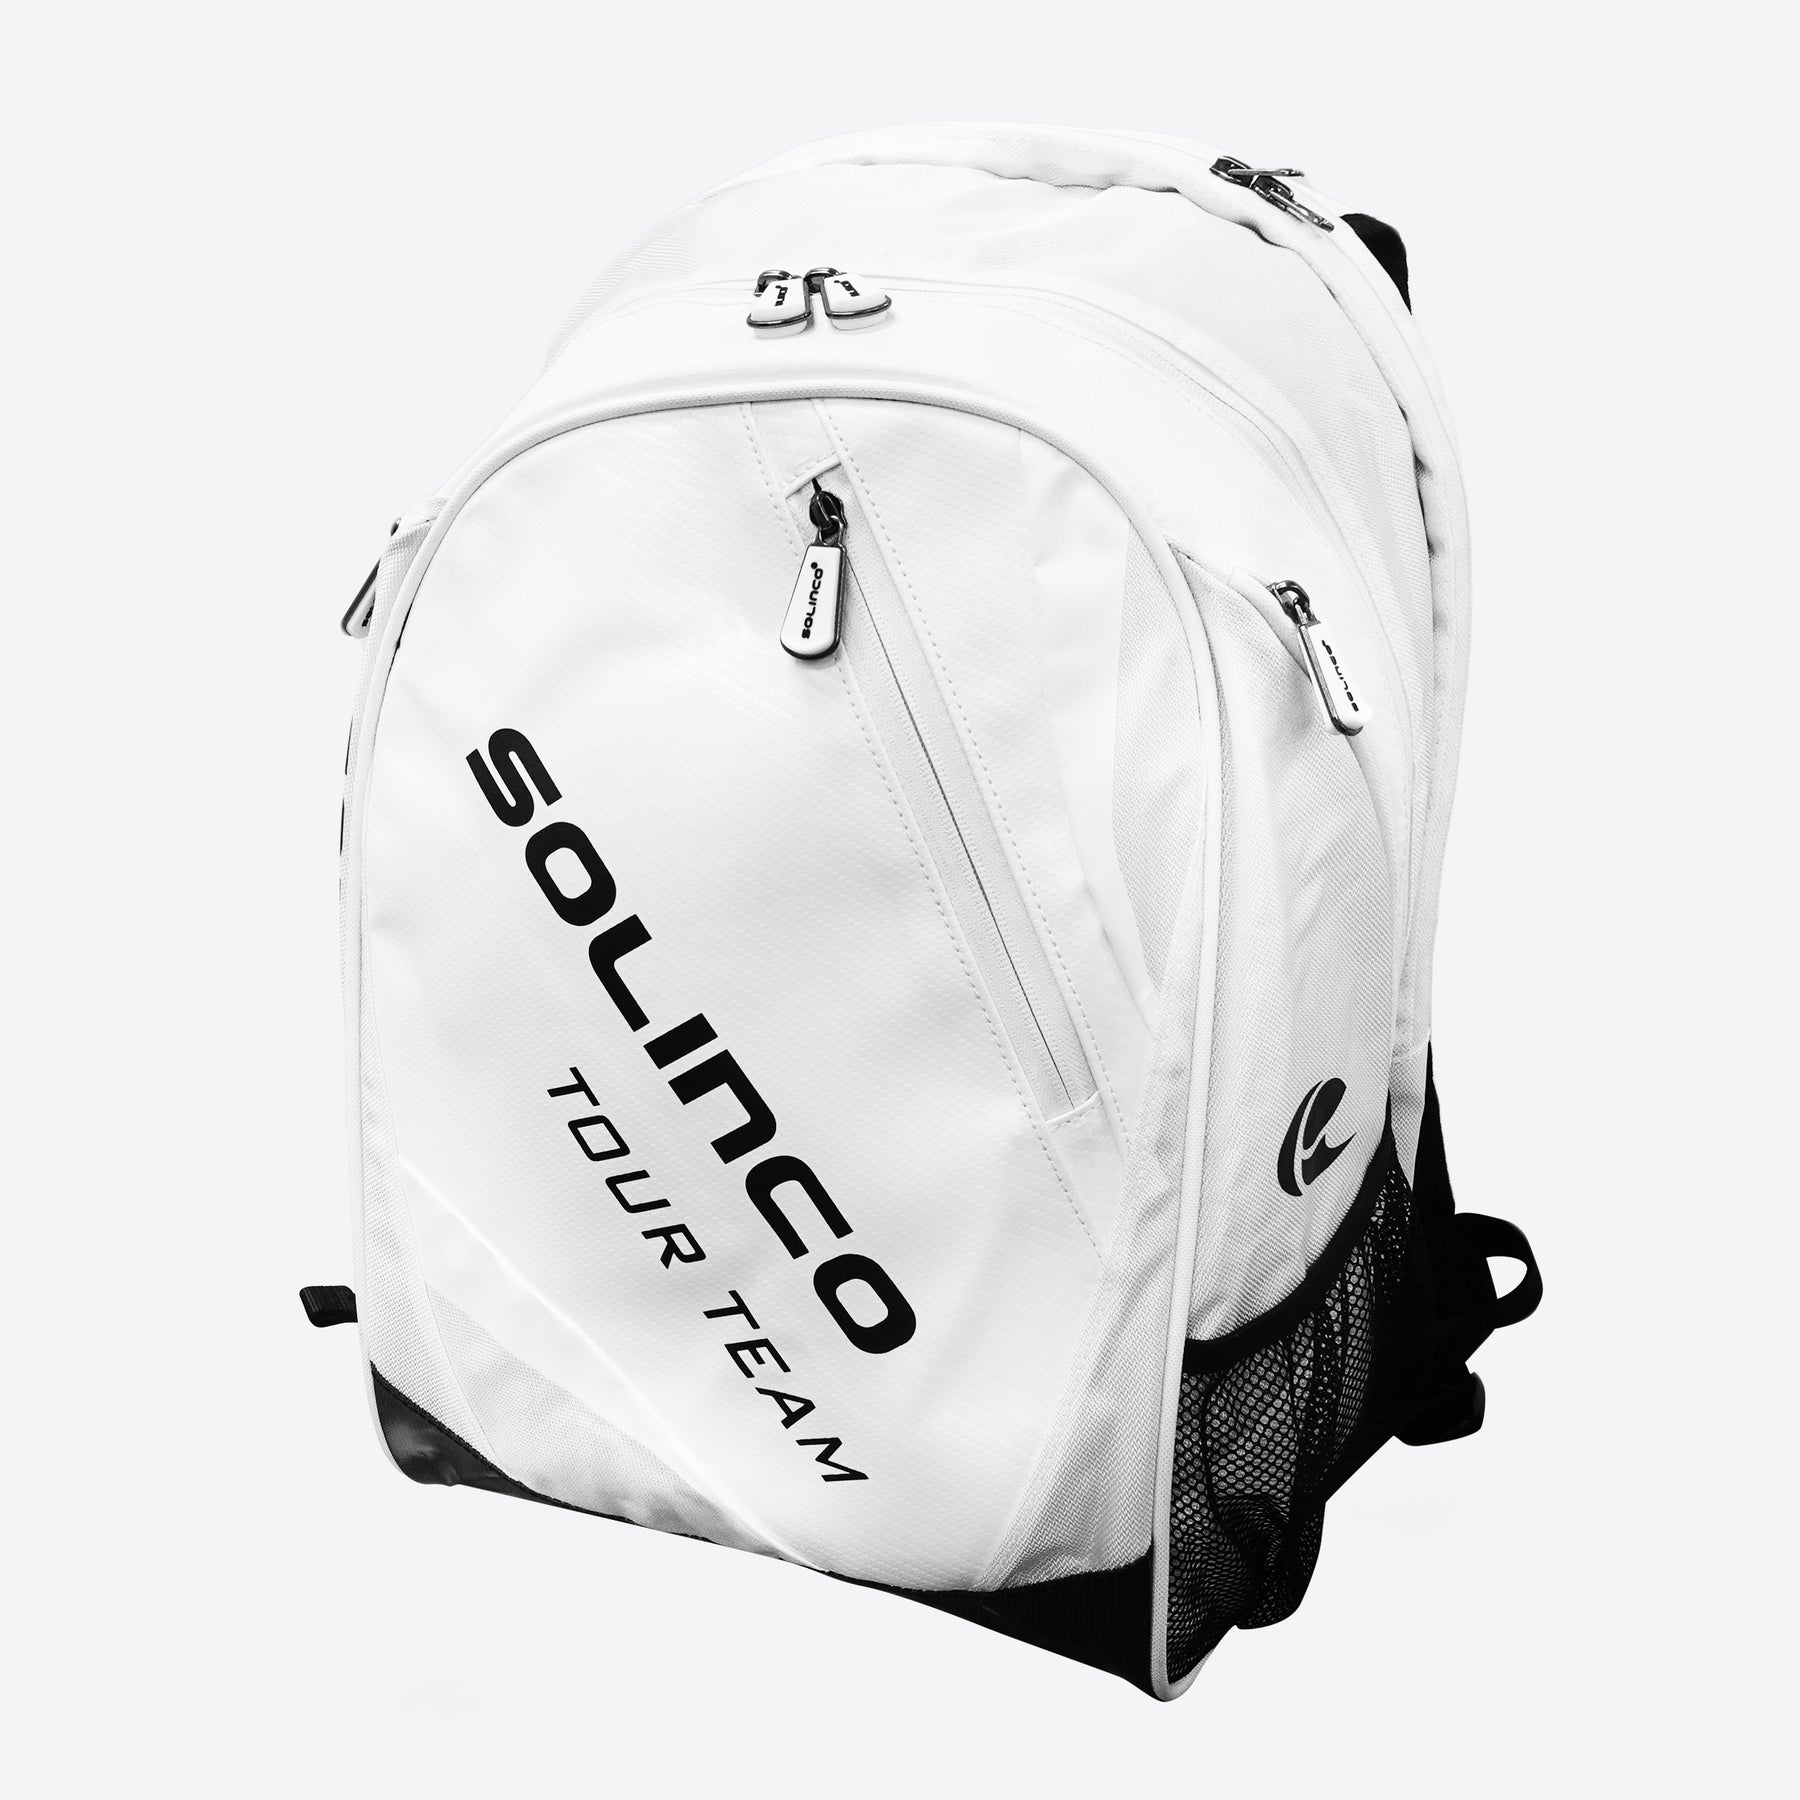 Solinco Whiteout Tour Tennis Backpack